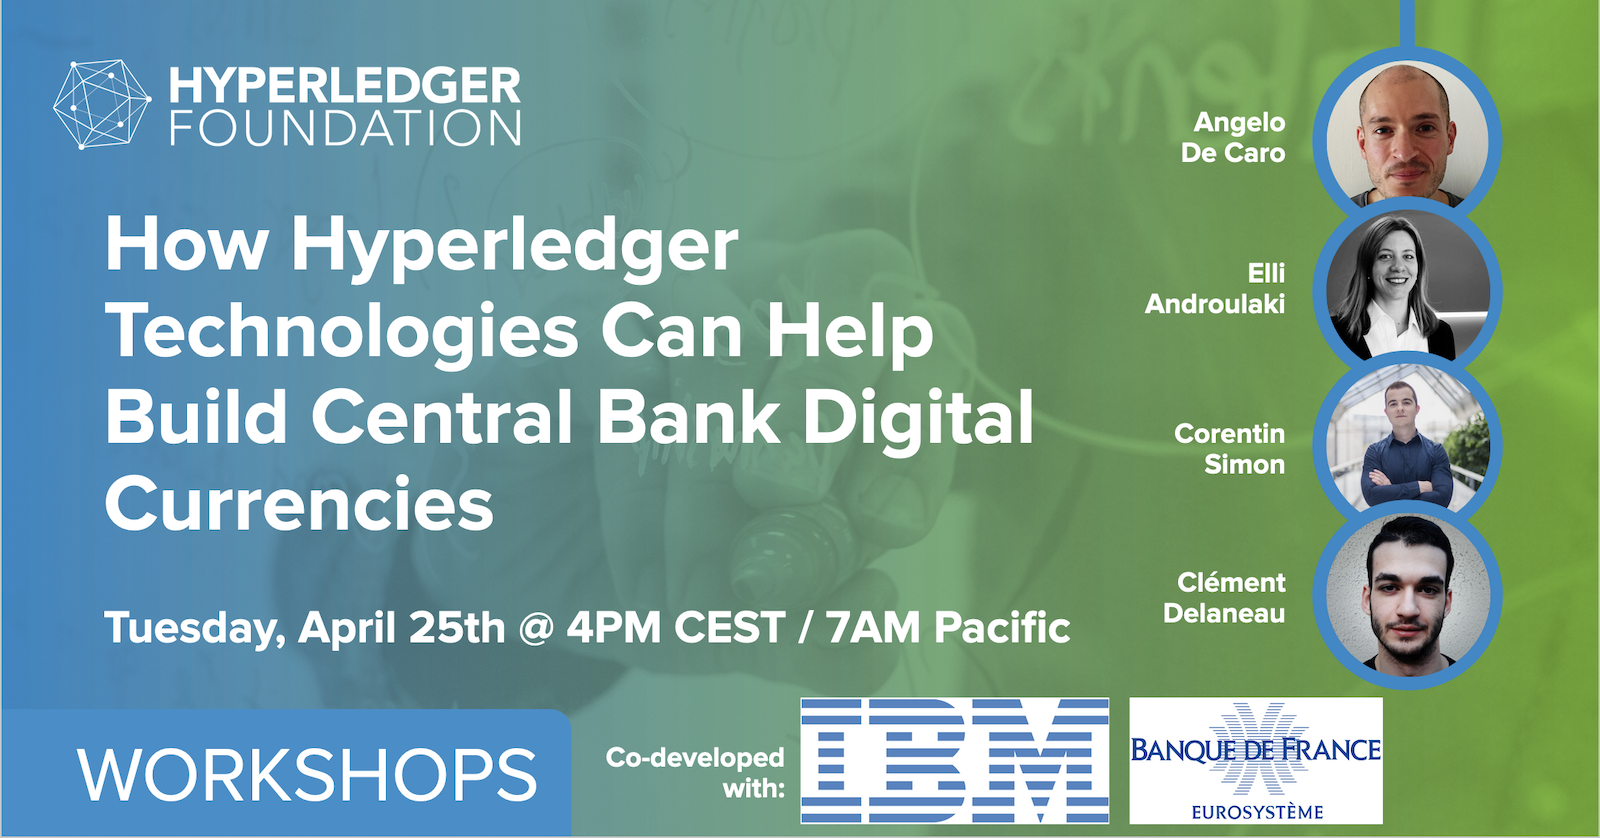 How Hyperledger Technologies Can Help Build Central Bank Digital Currencies